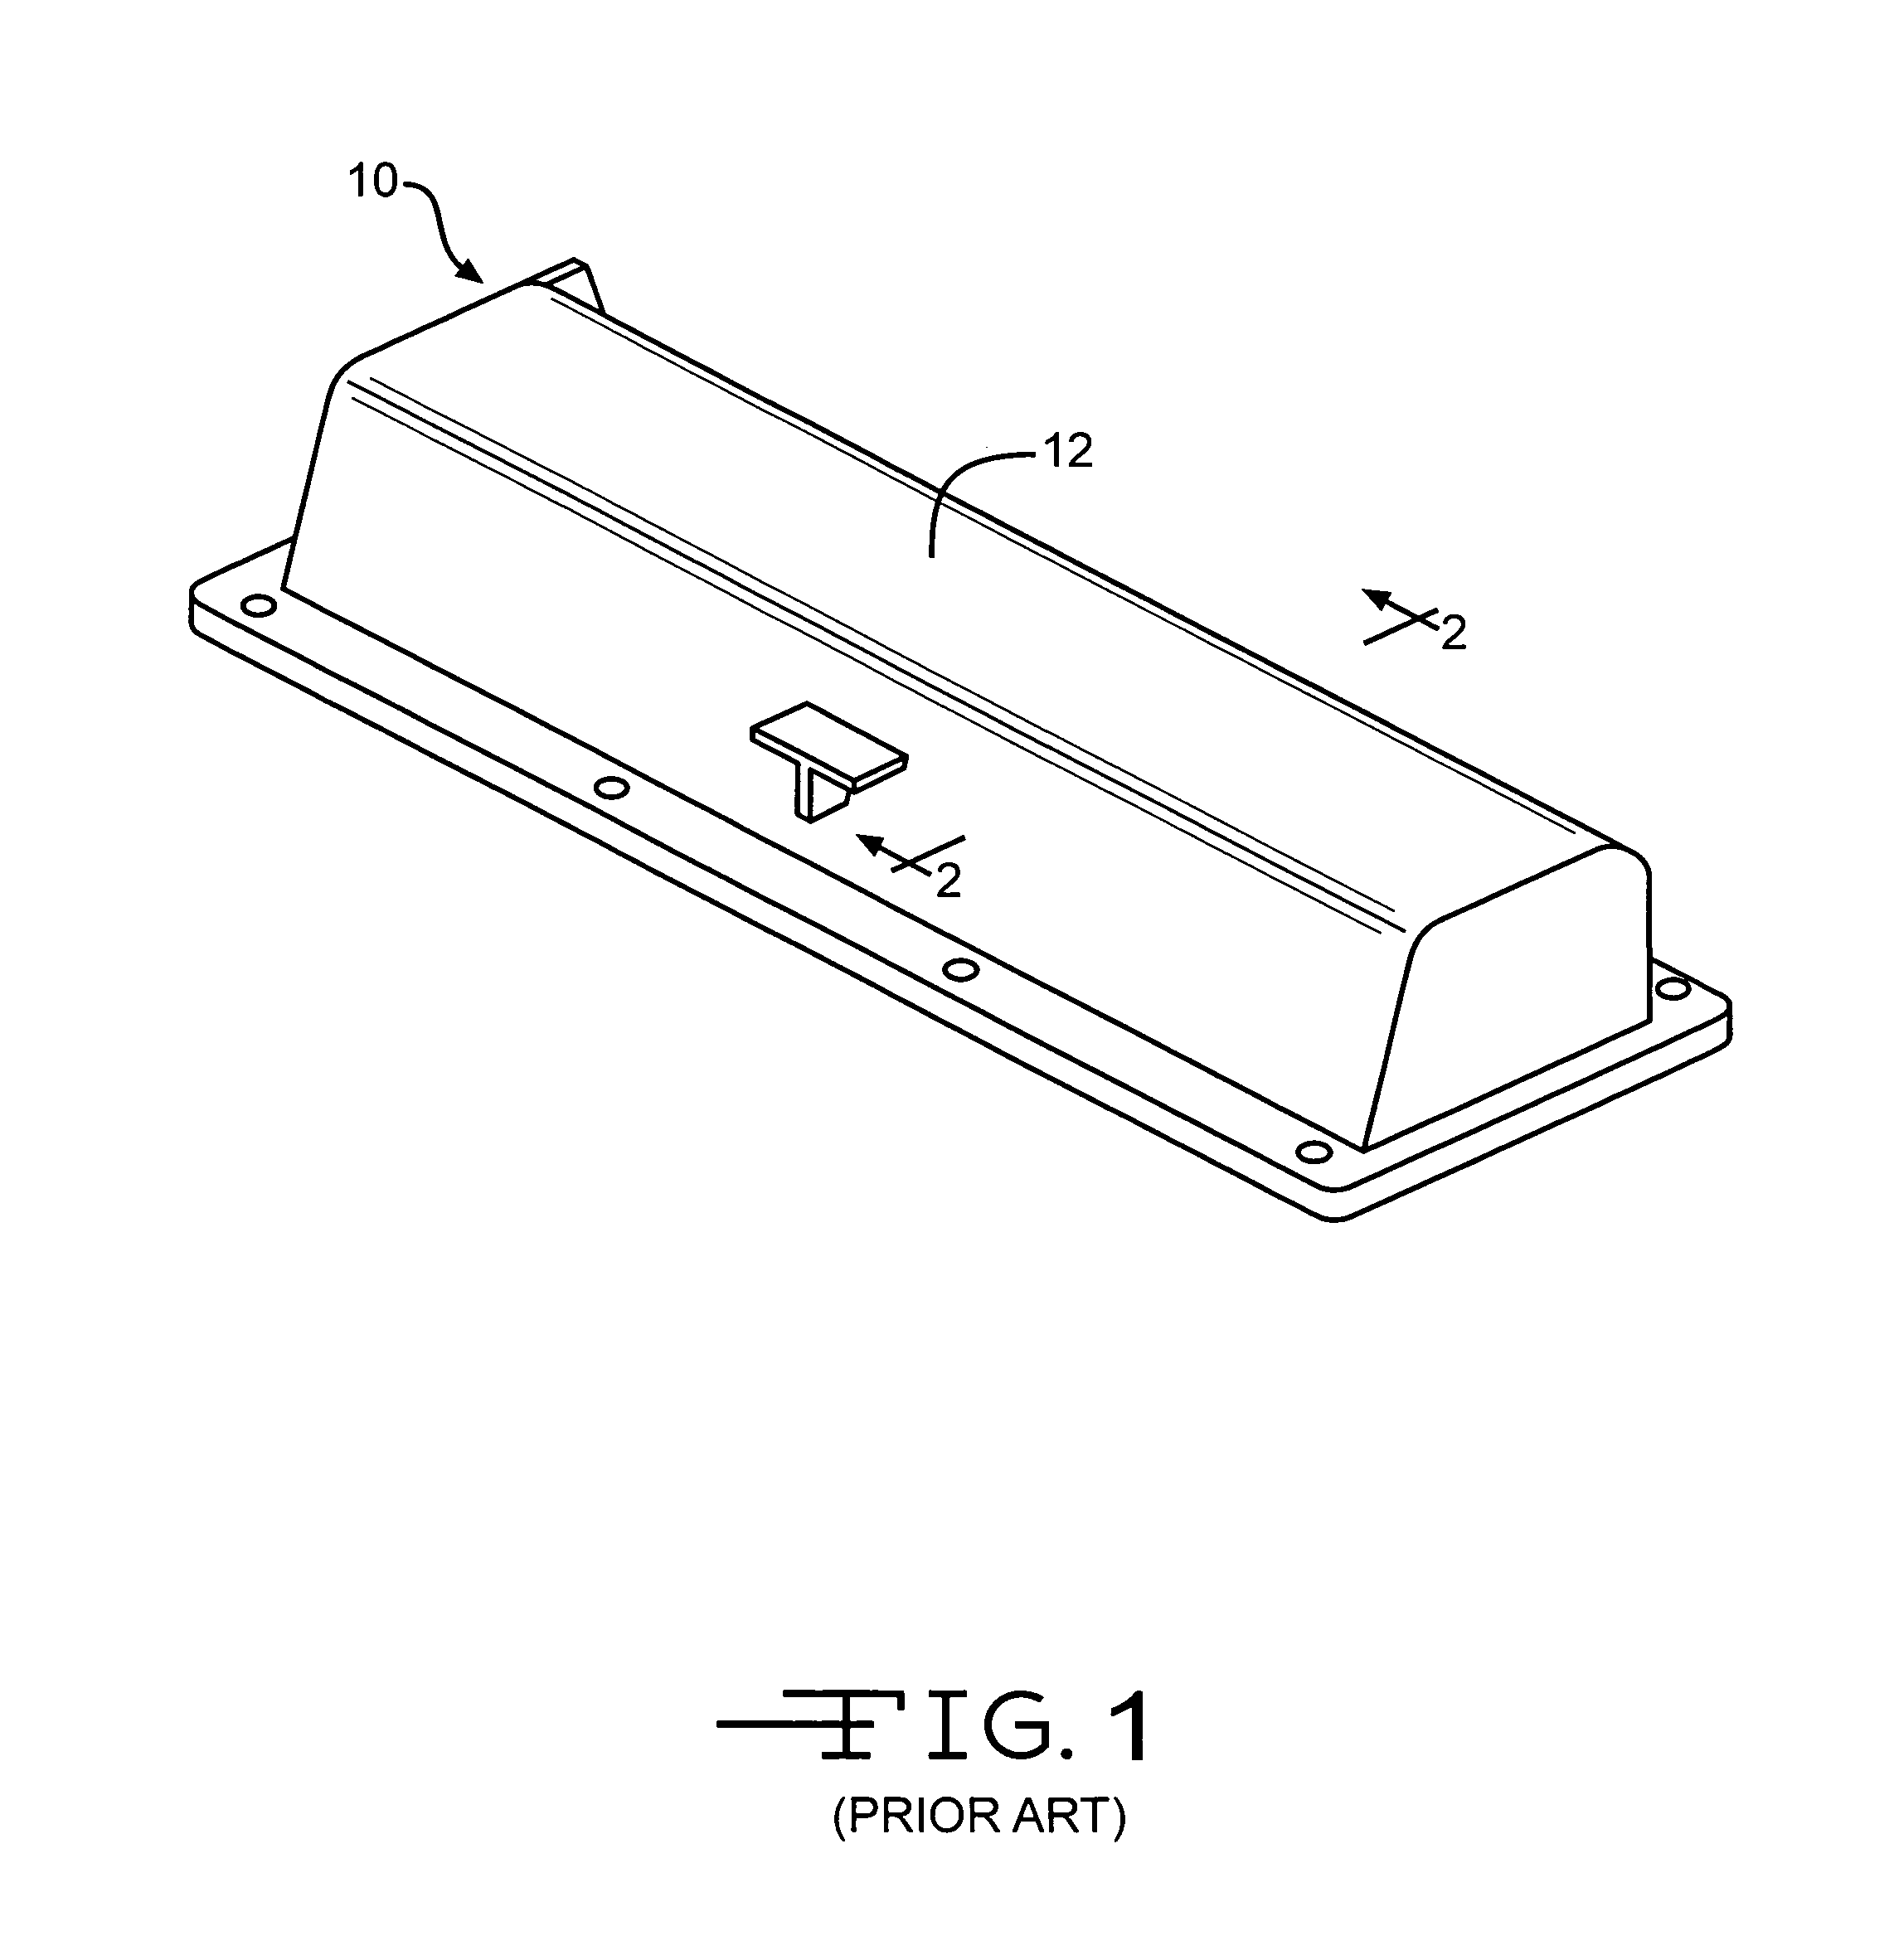 Valve cover assembly for a vehicle engine and method for producing same